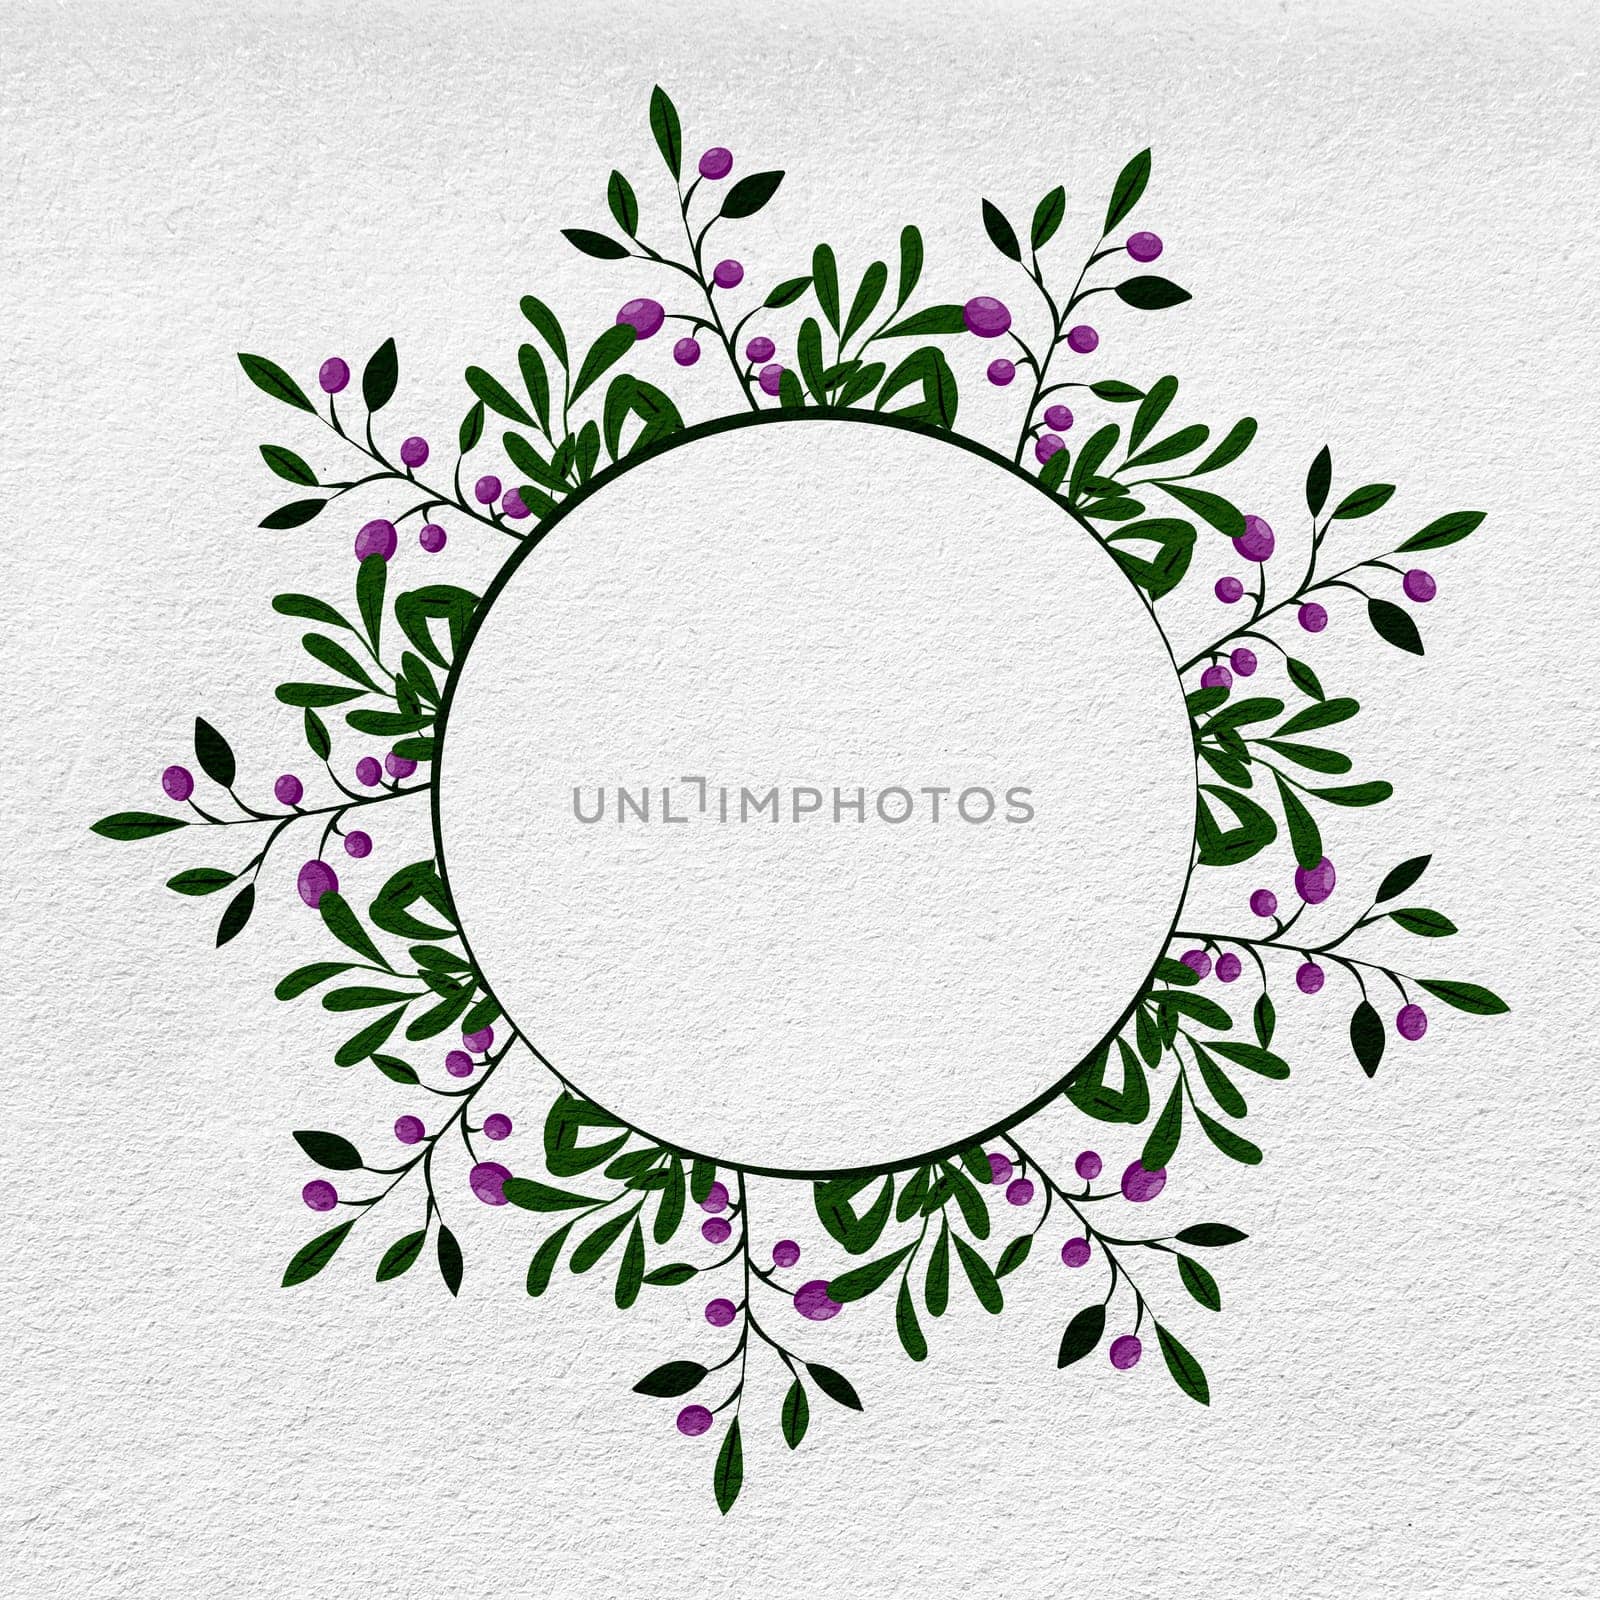 A circular frame filled with vibrant purple flowers and lush green leaves, creating a visually striking display of natures beauty and symmetry. The flowers are neatly arranged in a circular pattern, with the green leaves adding depth and contrast to the overall composition.